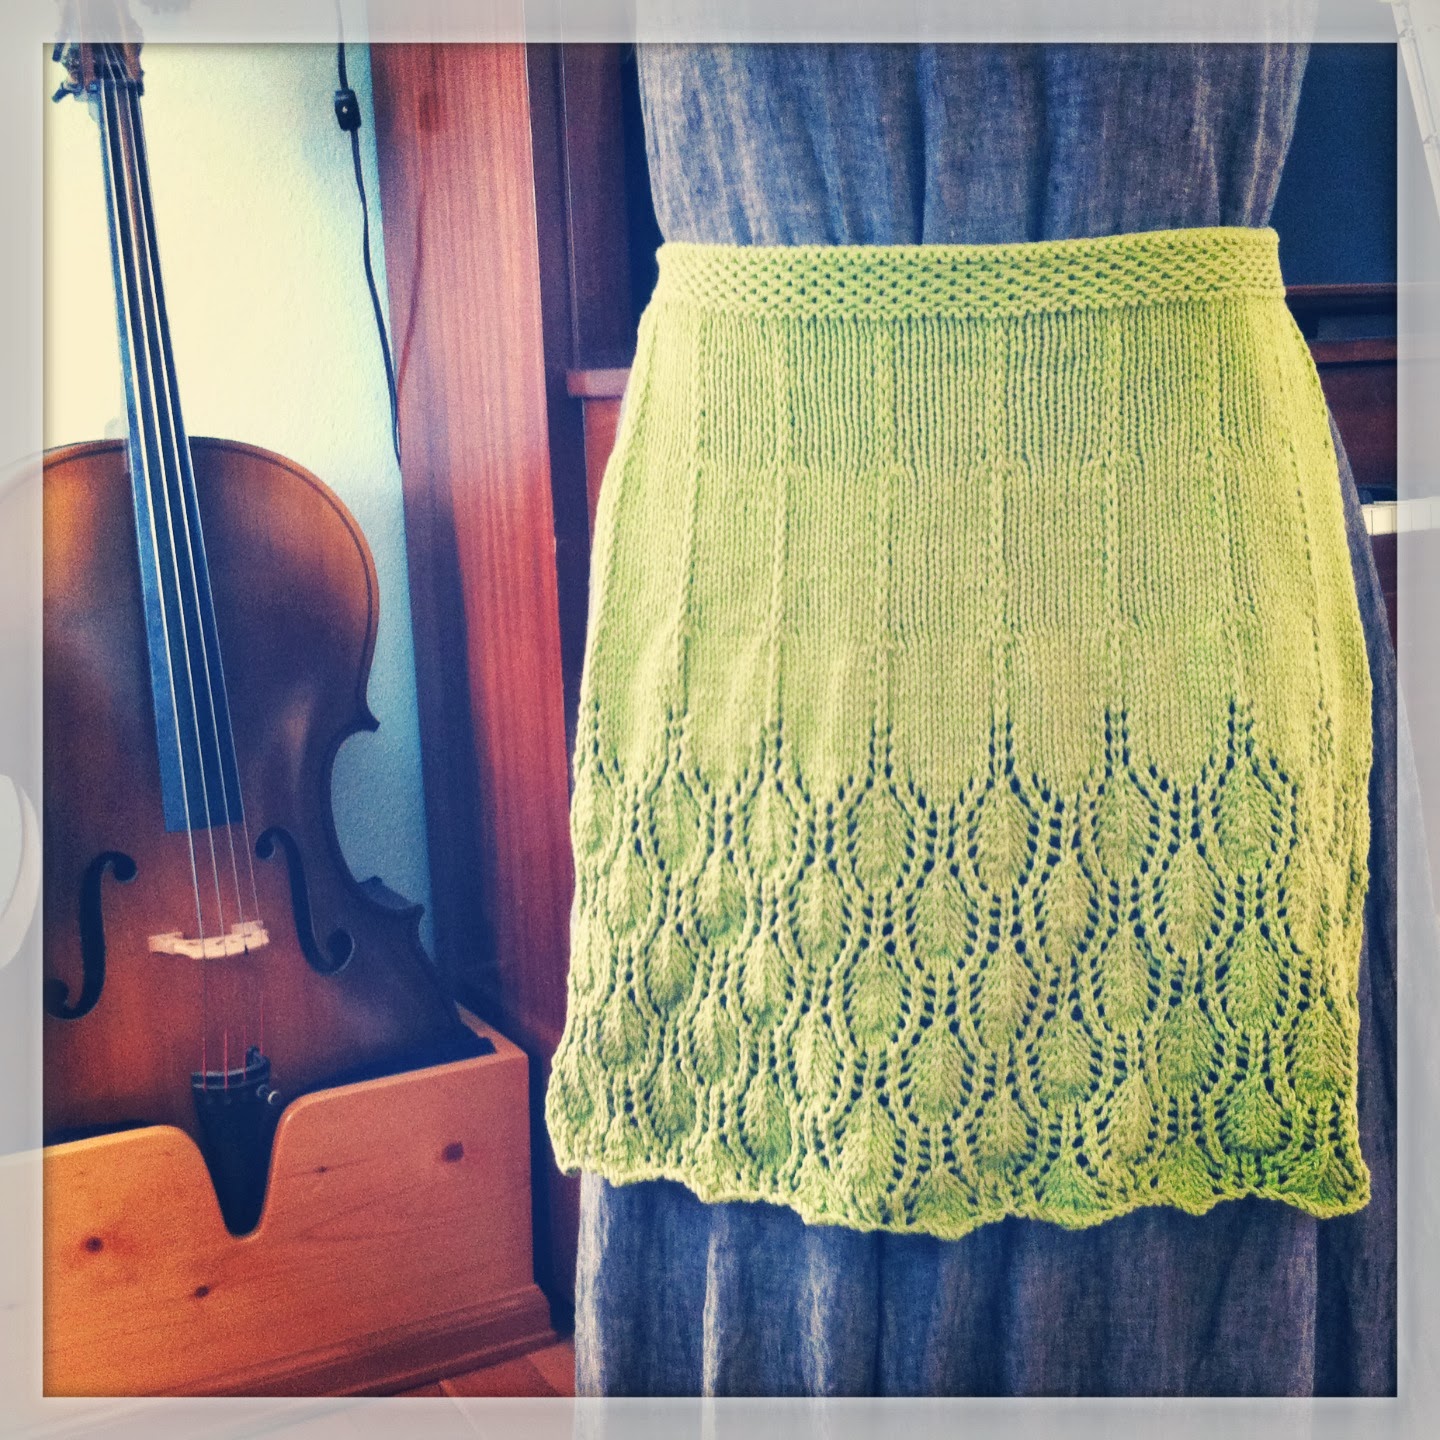 Photos of Knitted Apron Patterns